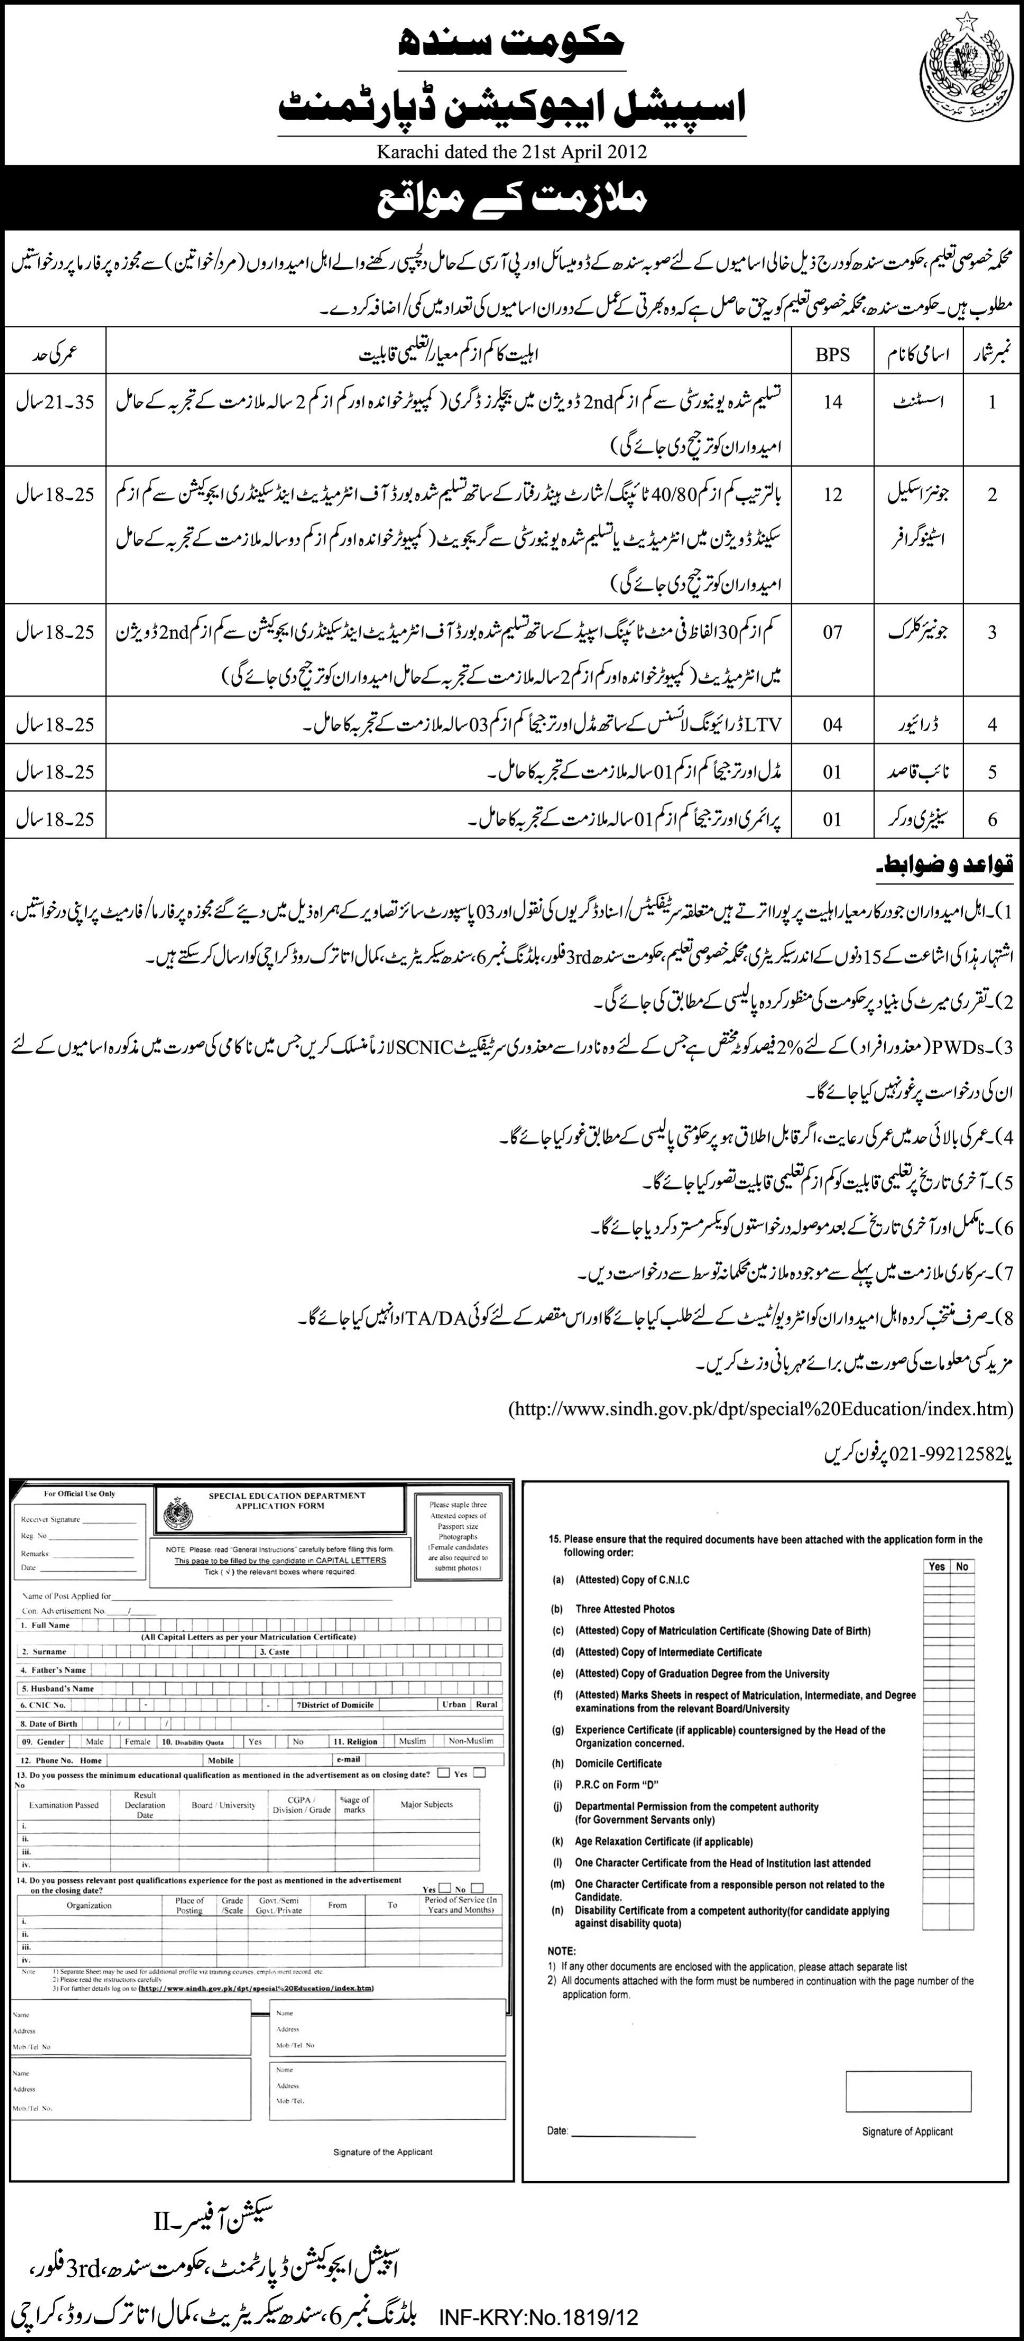 Special Education Department, Government of Sindh, Jobs